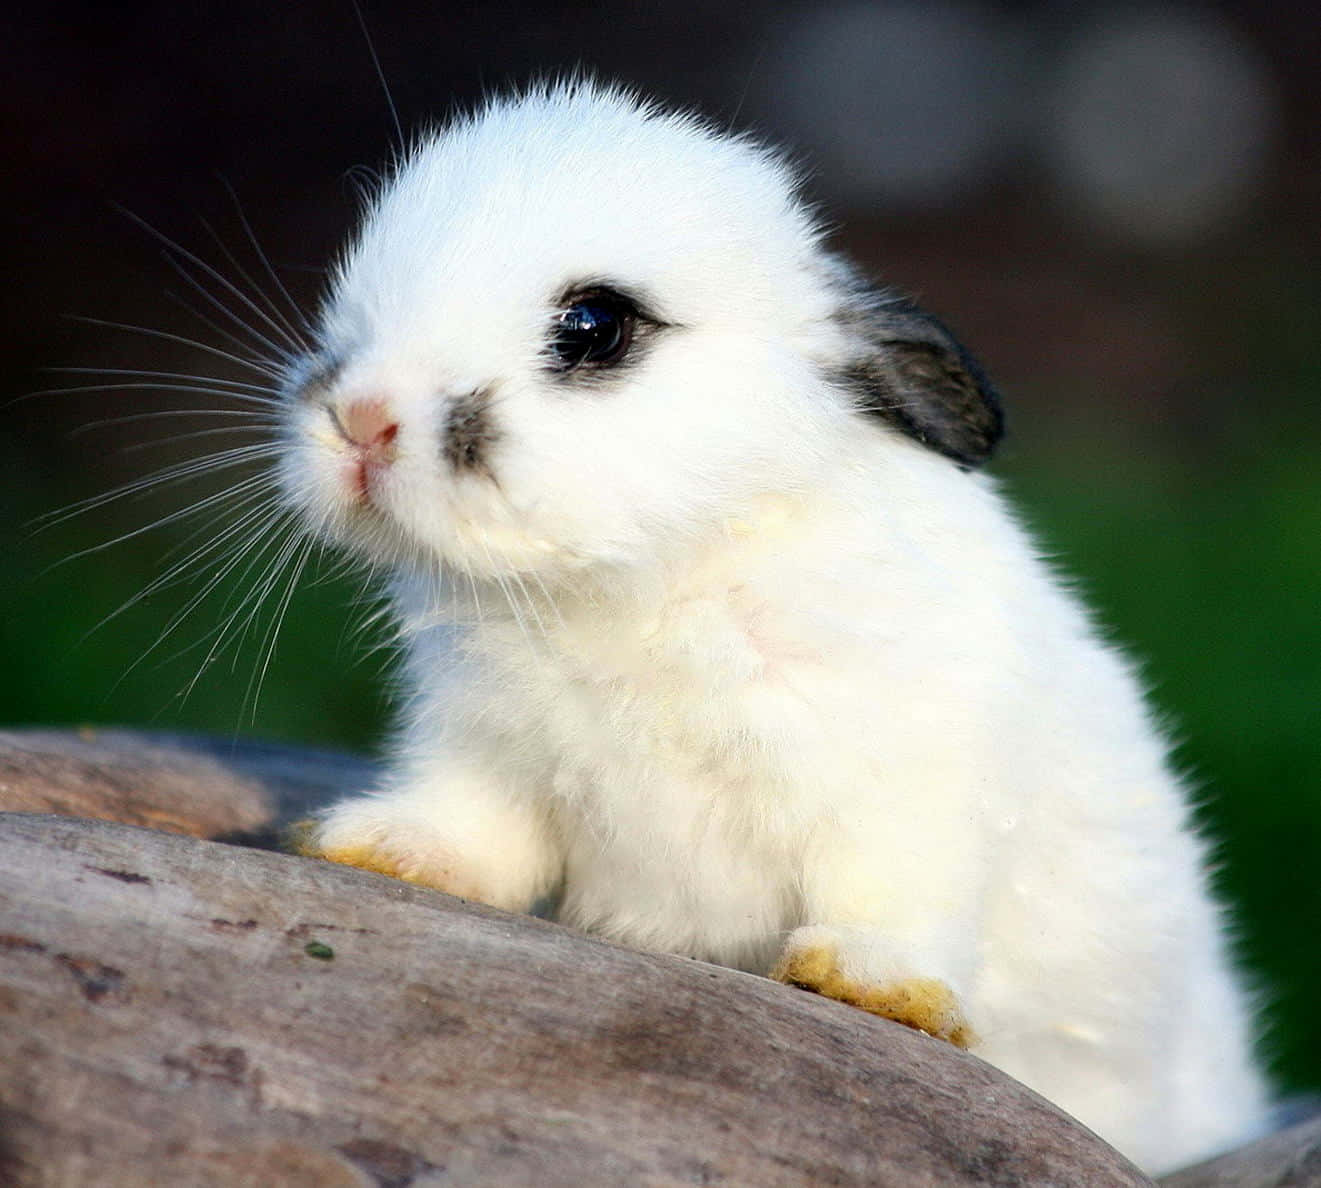 Black Eared Cute Bunny Picture